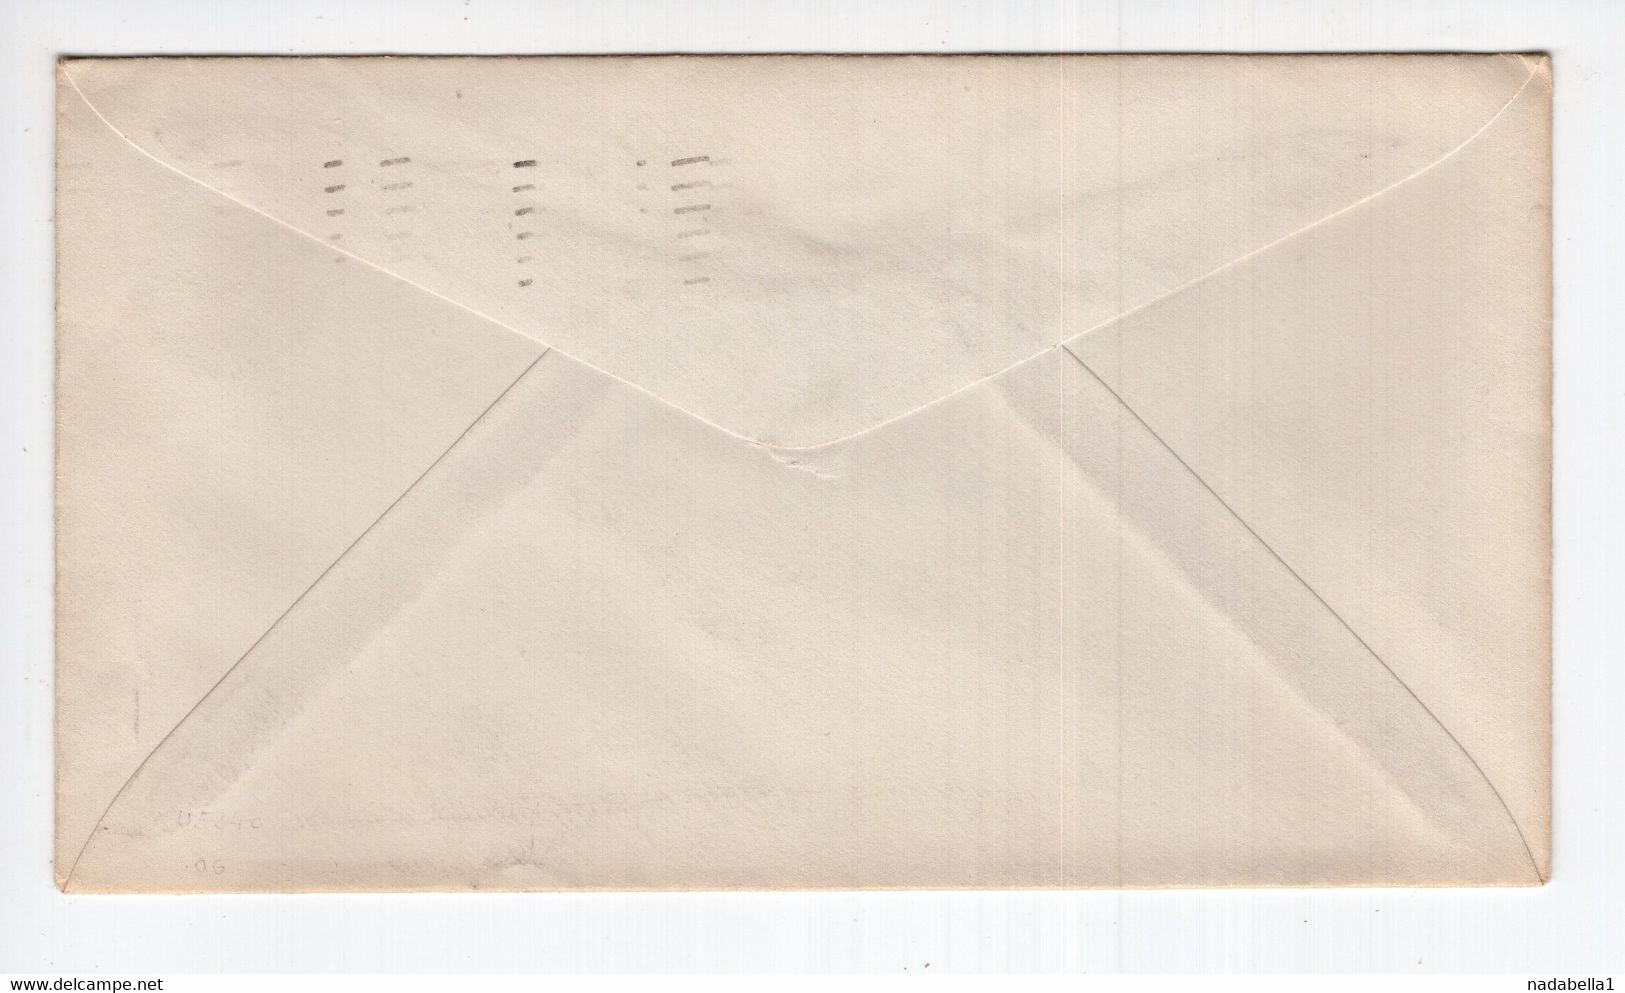 1953. UNITED STATES,GLENSIDE PA. LOCAL,CARMEL PRESBYTERIAN CHURCH HEADED COVER,3 CENTS STATIONERY STAMPED COVER - 1941-60